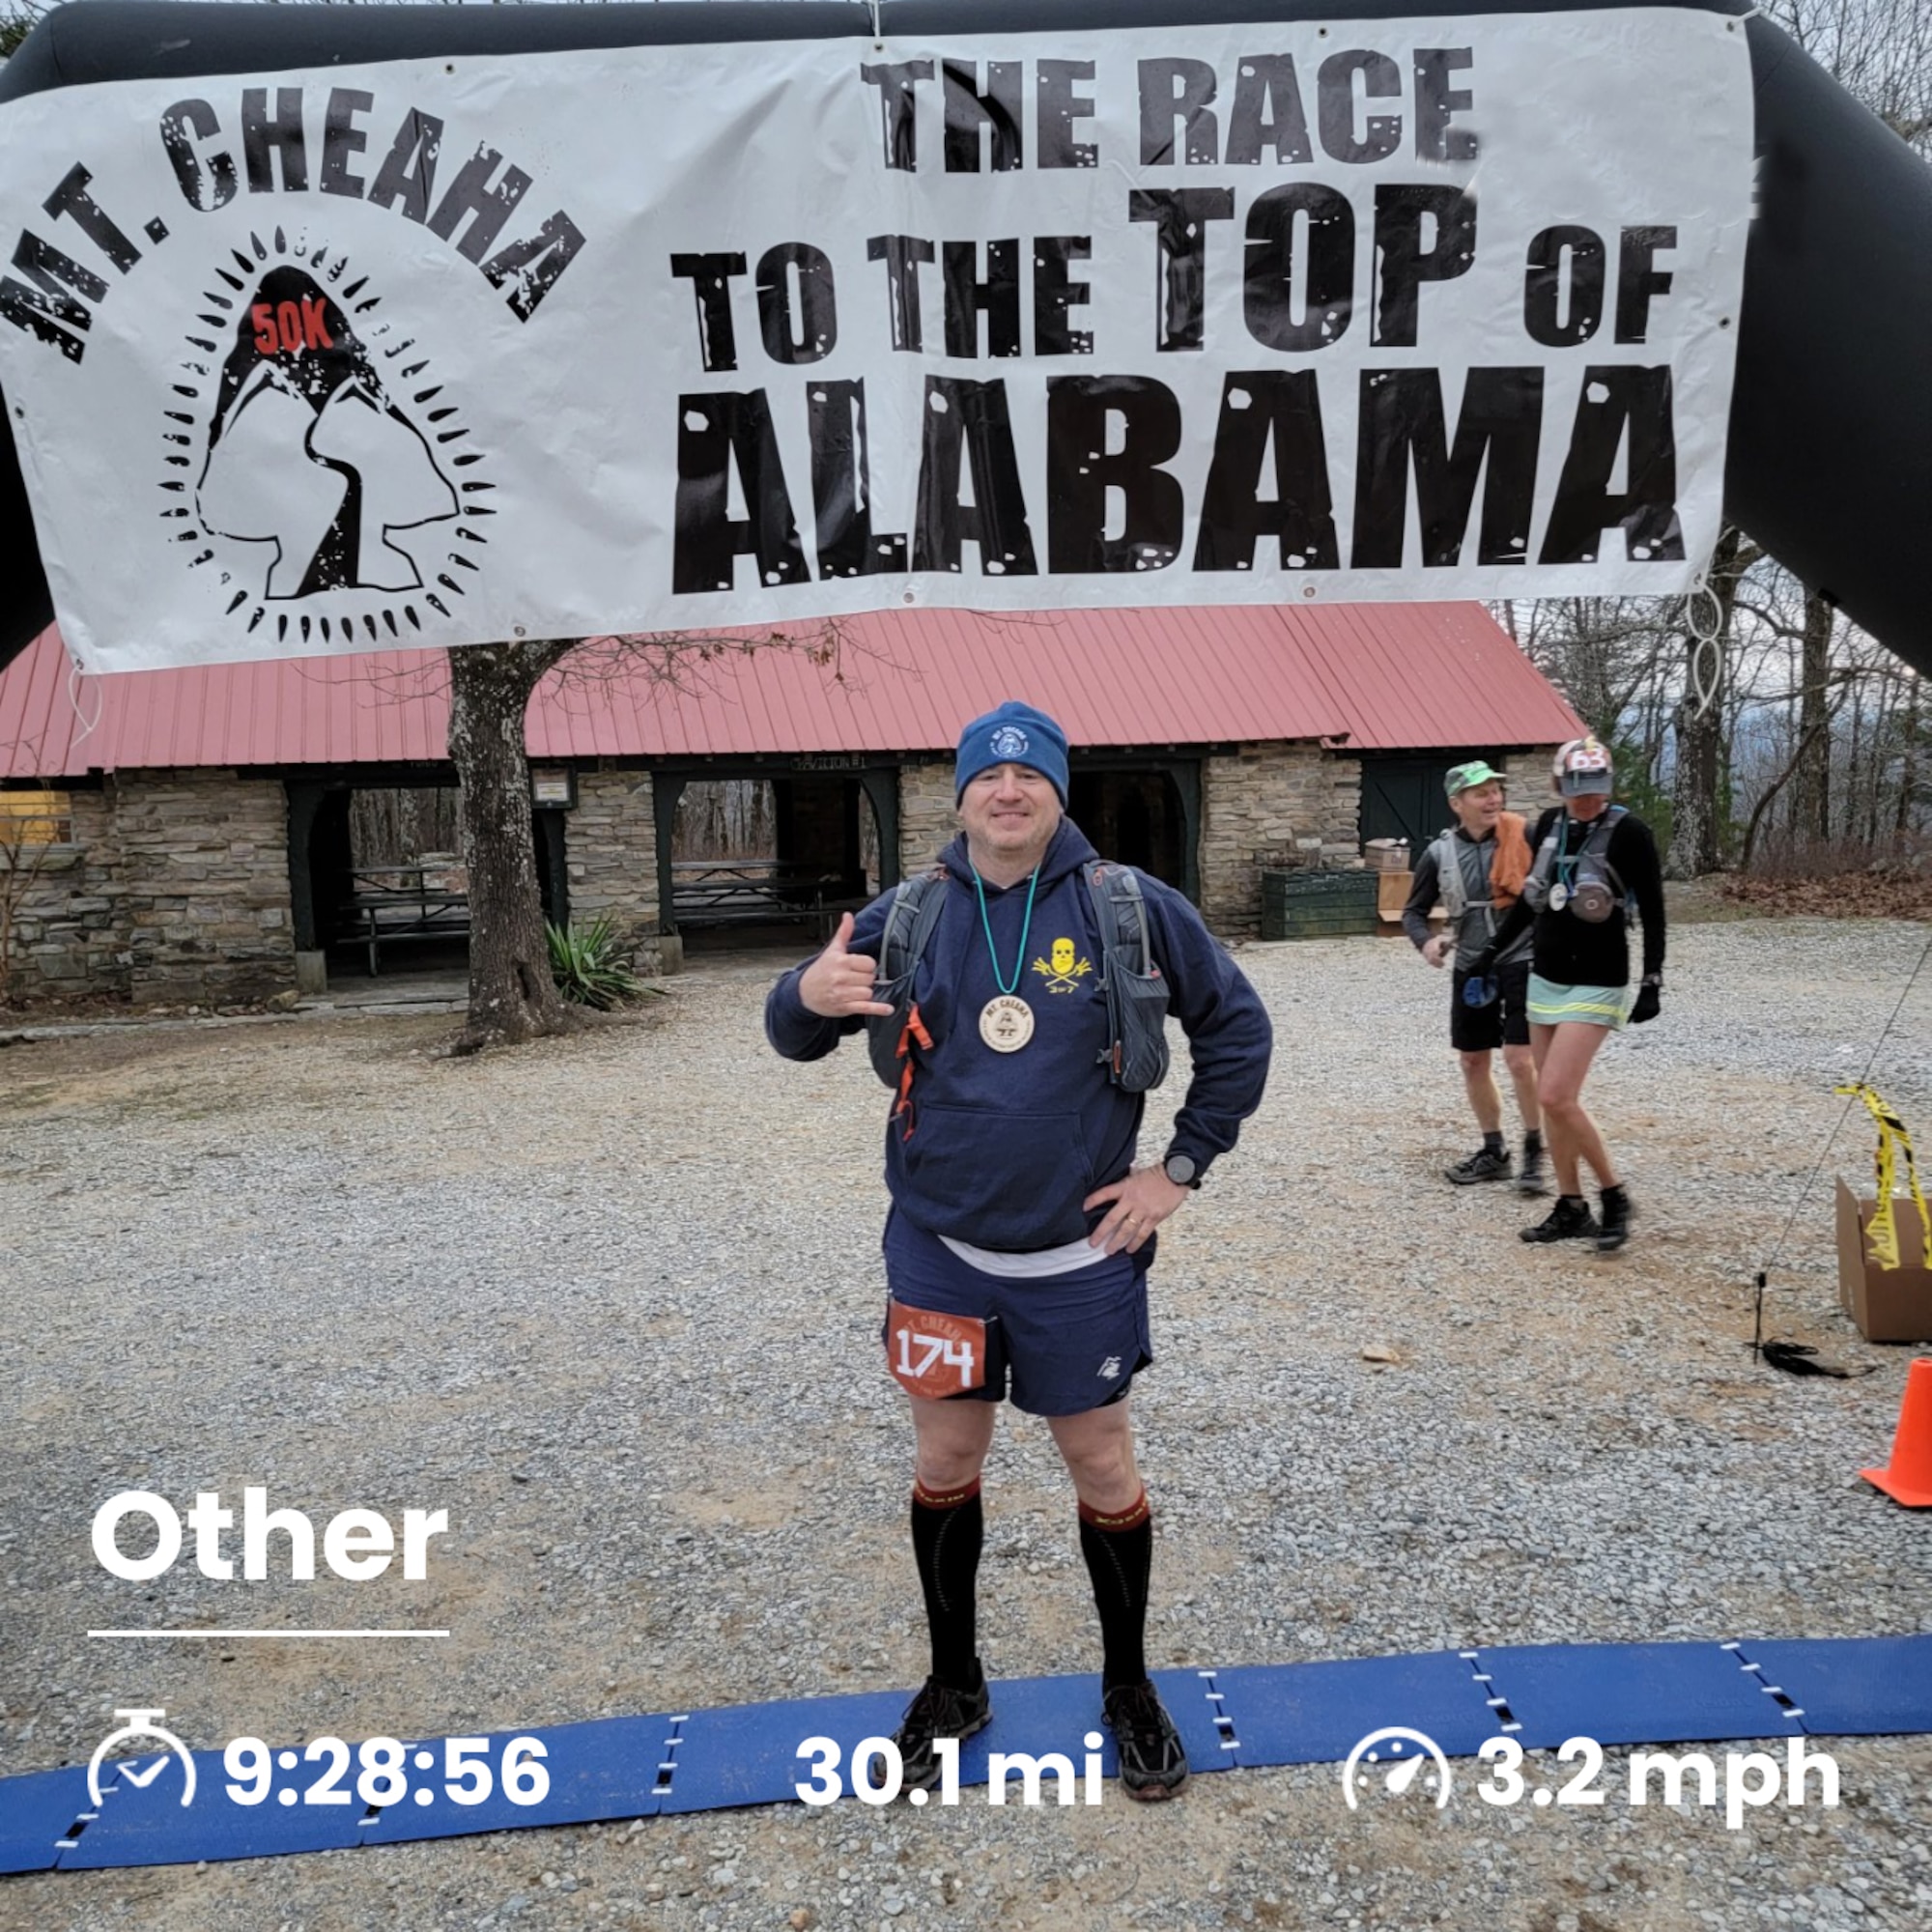 Lt. Col. Weed stands in running gear at a finish line. Banner above reads "Mt. Cheaha The Race to the Top of Alabama"